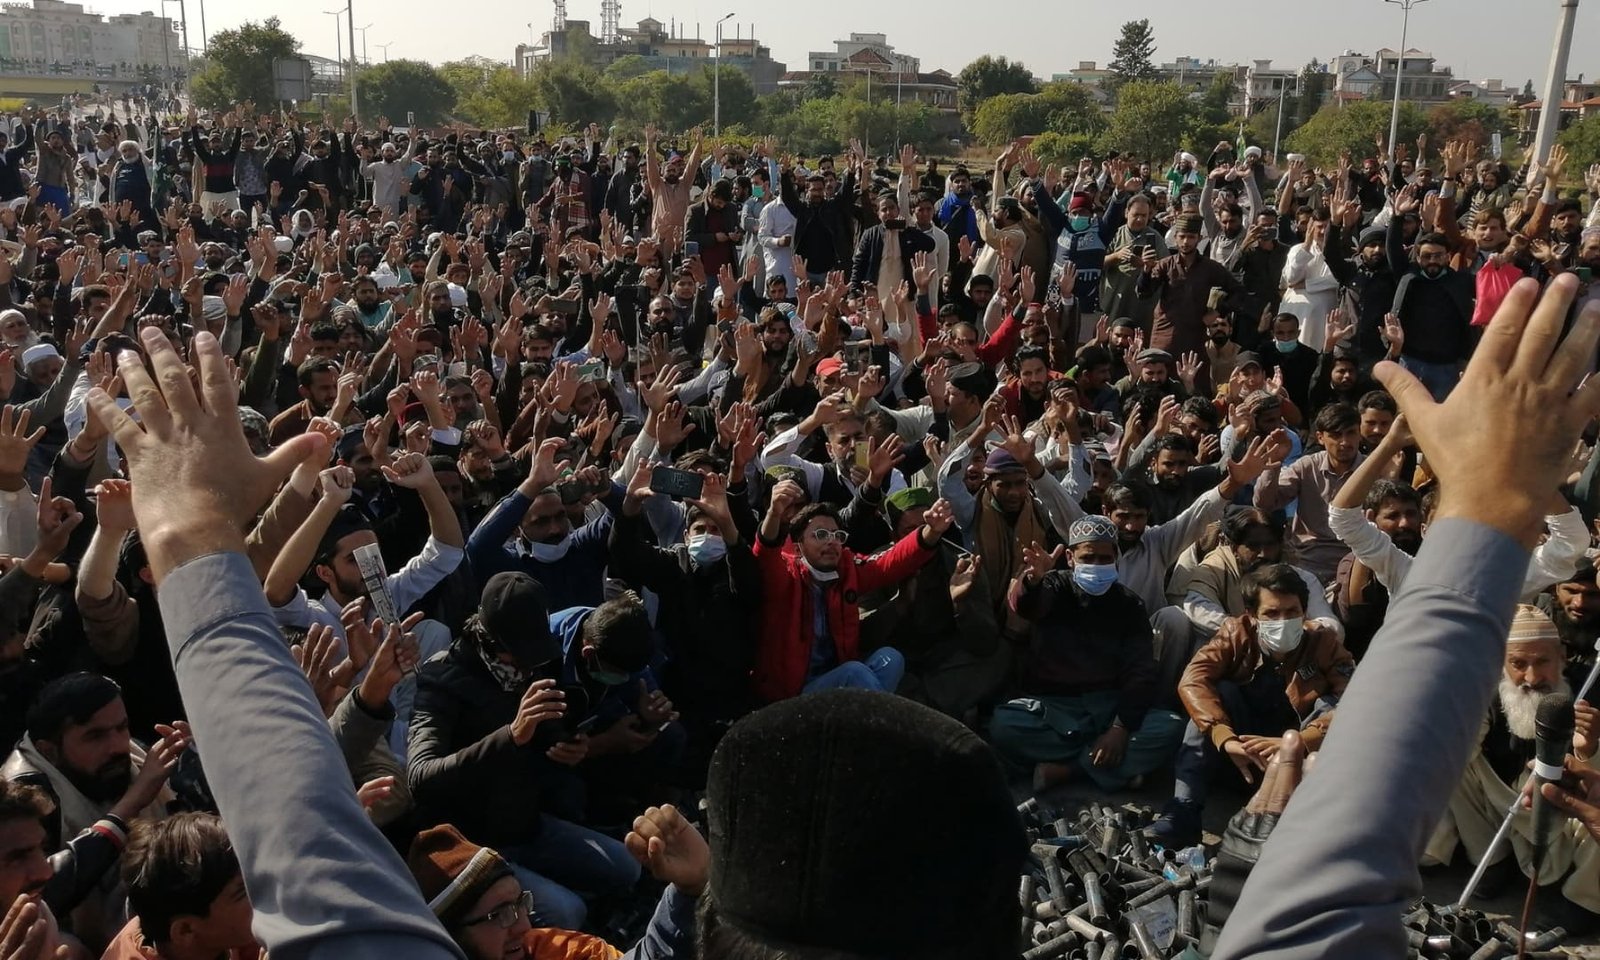 Pakistan Riots : PM Signs Proposal To Ban TLP Under Anti-Terrorism Law, What Does The TLP Want?